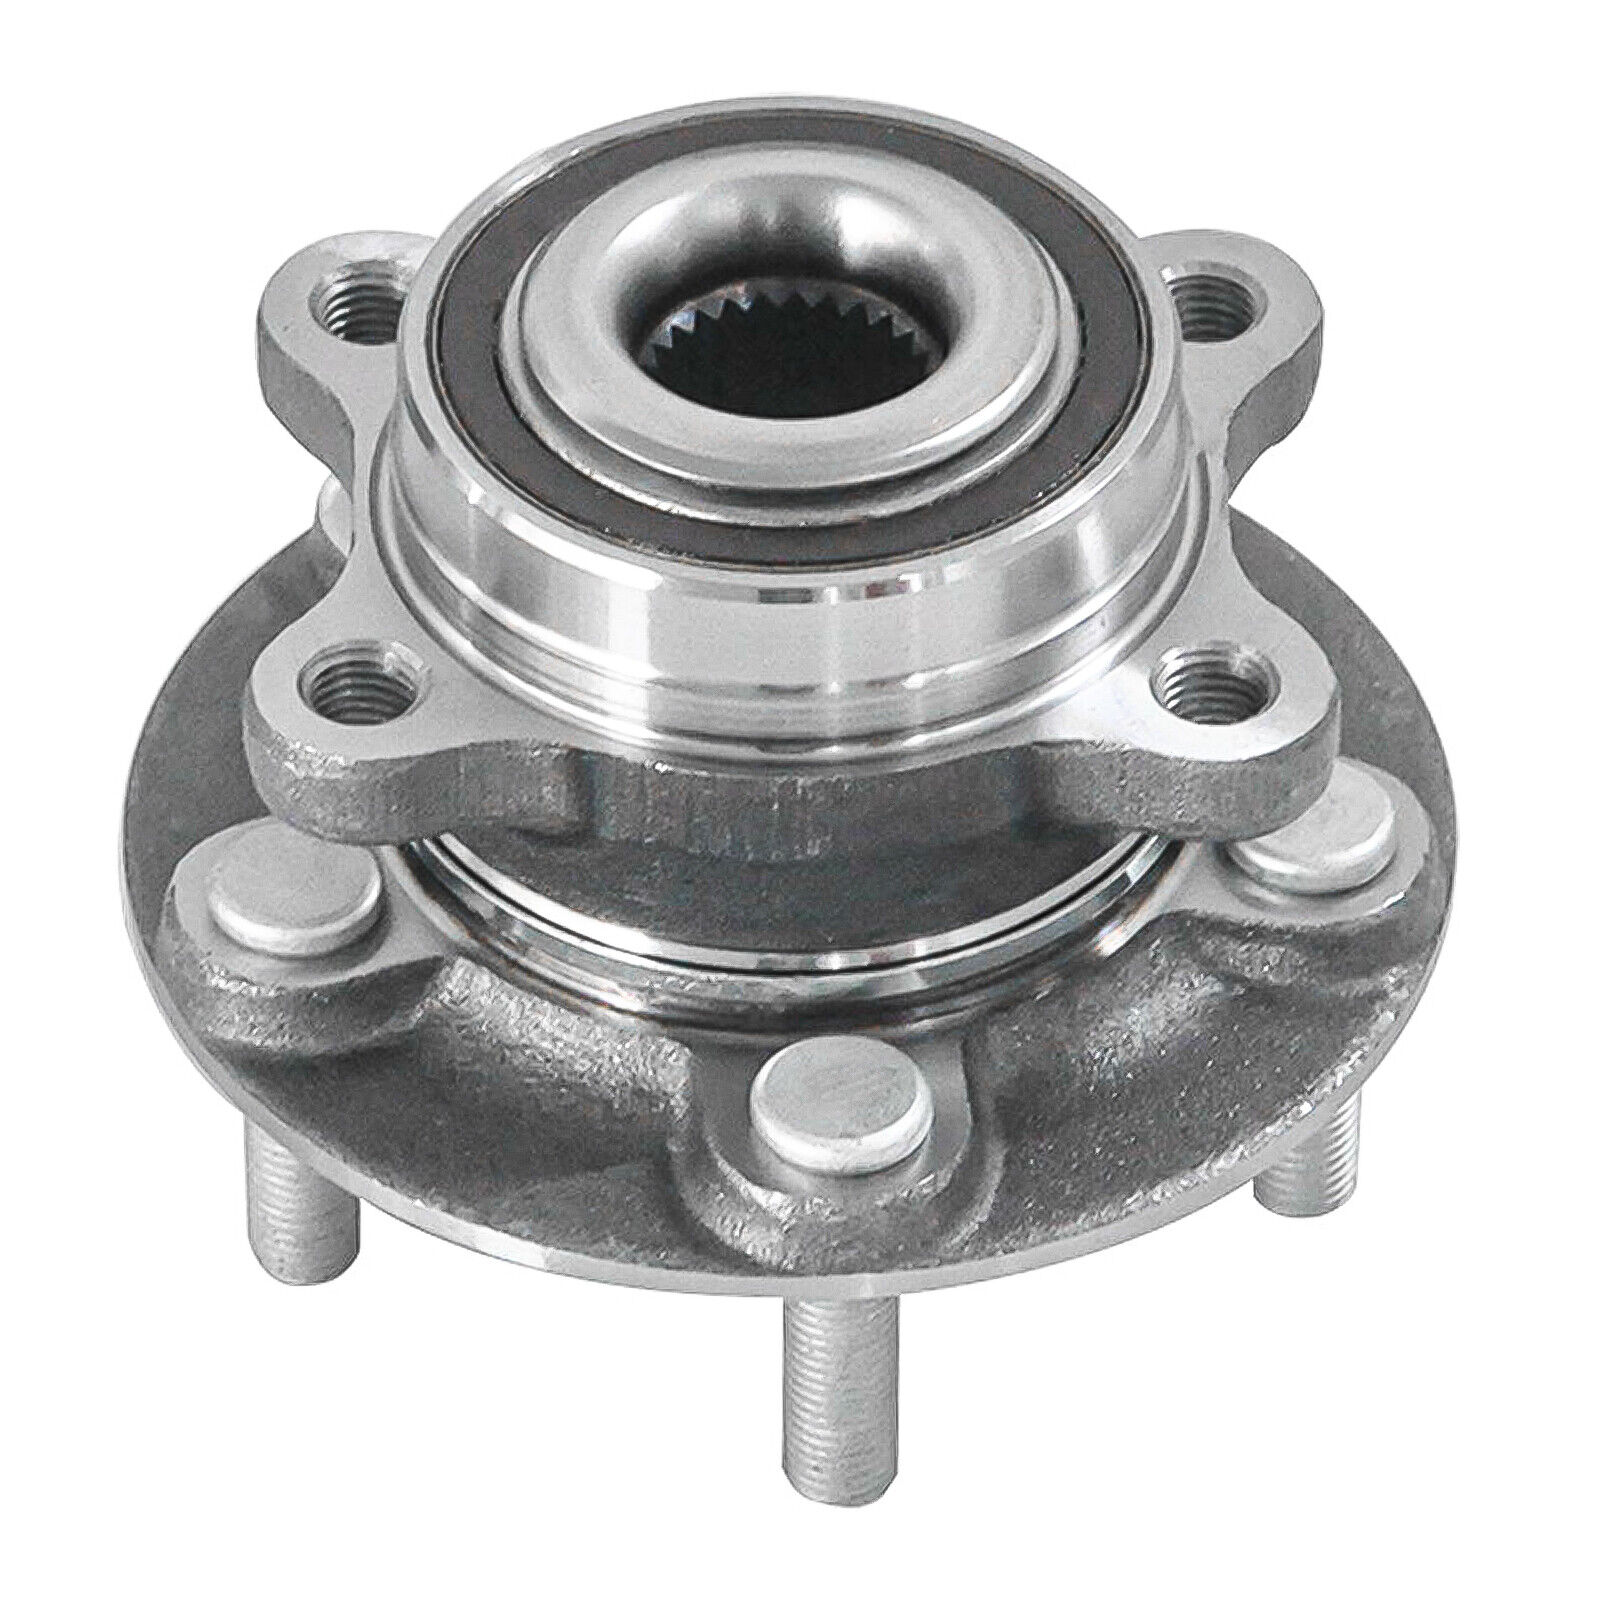 1x 512498 Front Wheel Bearing & Hubs For Lincoln MKZ Ford Fusion 2013-2016